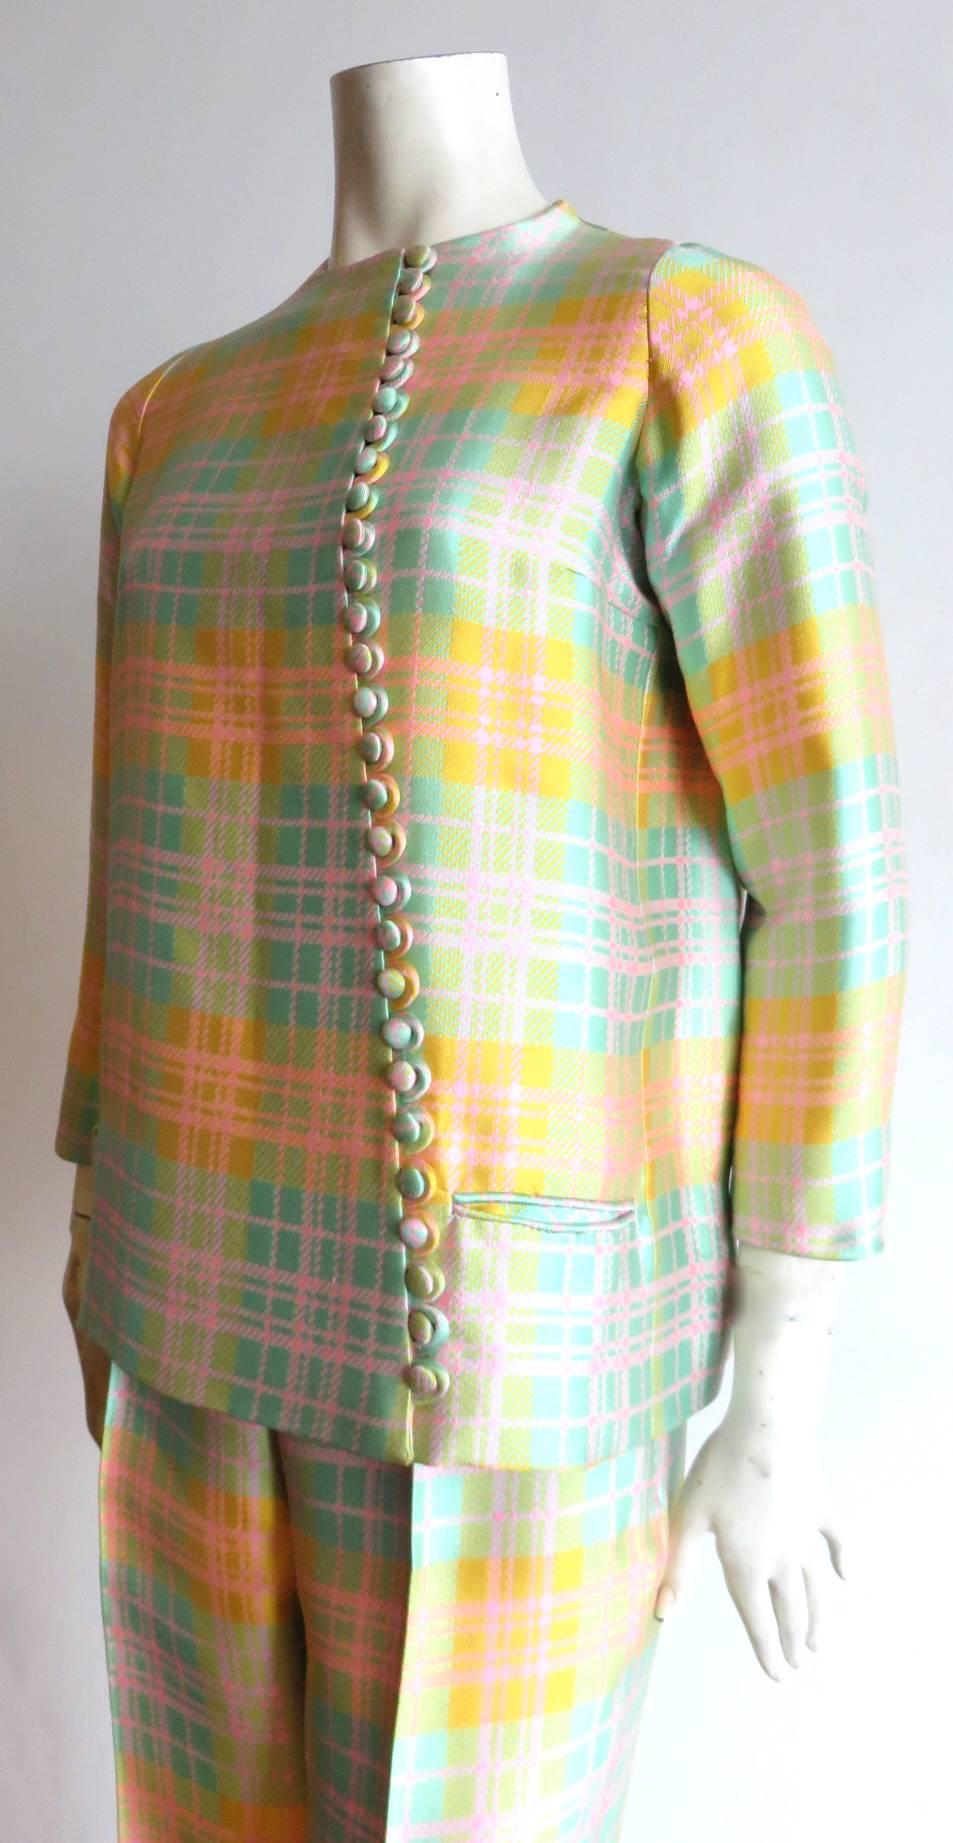 Wonderful, 1970's DONALD BROOKS, luminous silk jacket & pant set.

Couture-quality construction, of luxurious silk fabric in delightful, pastel color plaid.  

Loop button closures along front.

The jacket has a flared, 'A'-line silhouette